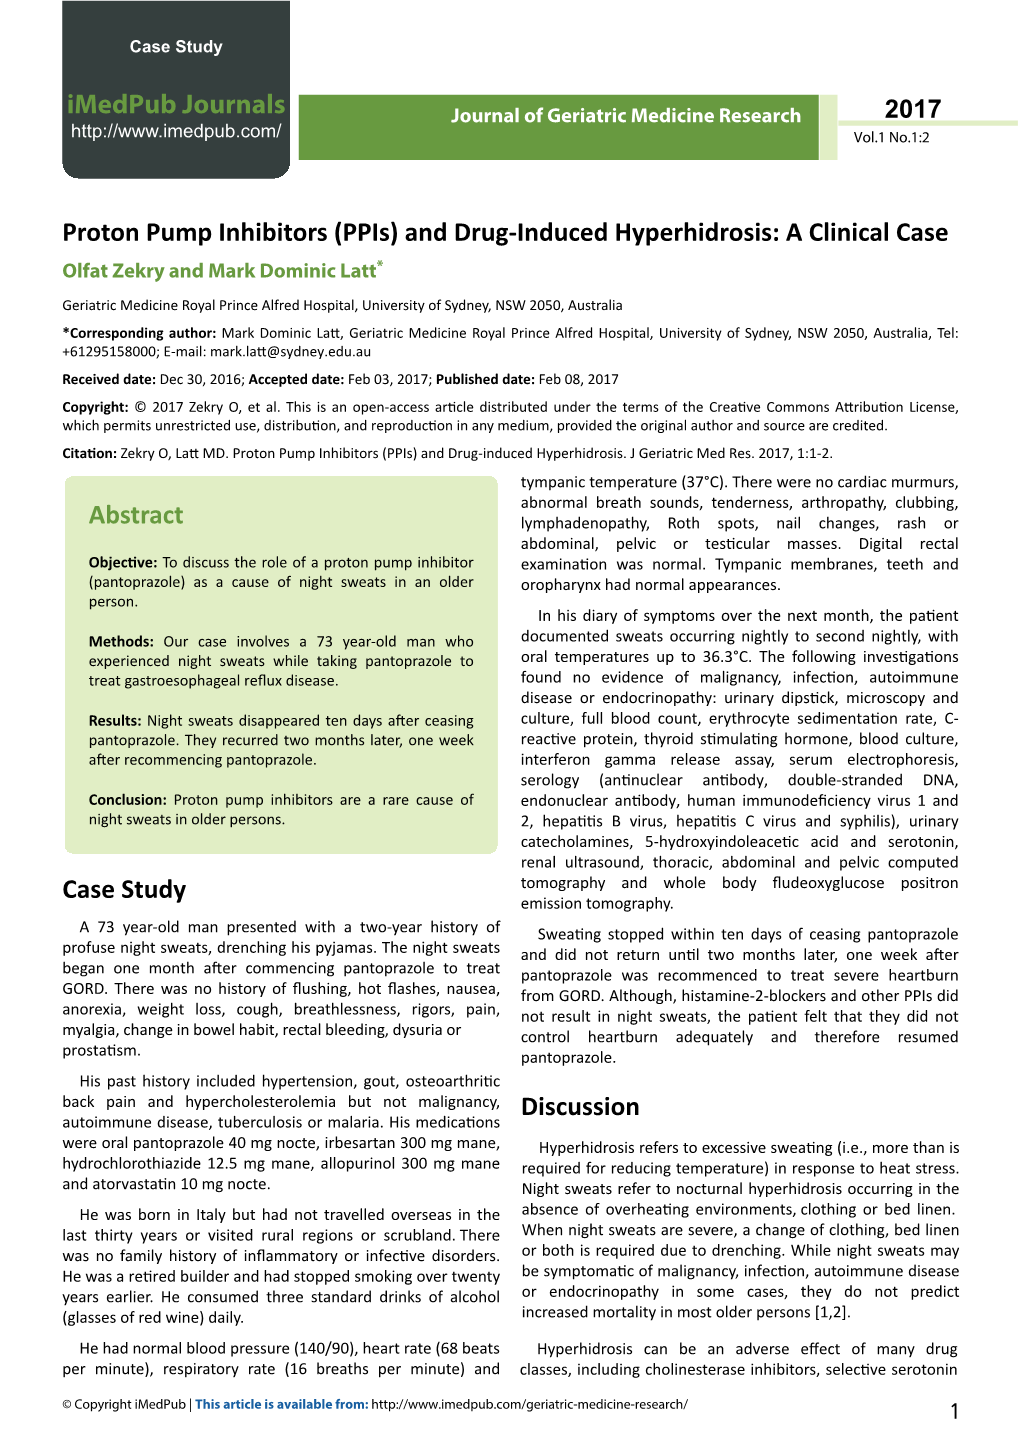 Proton Pump Inhibitors (Ppis) and Drug-Induced Hyperhidrosis: a Clinical Case Olfat Zekry and Mark Dominic Latt*